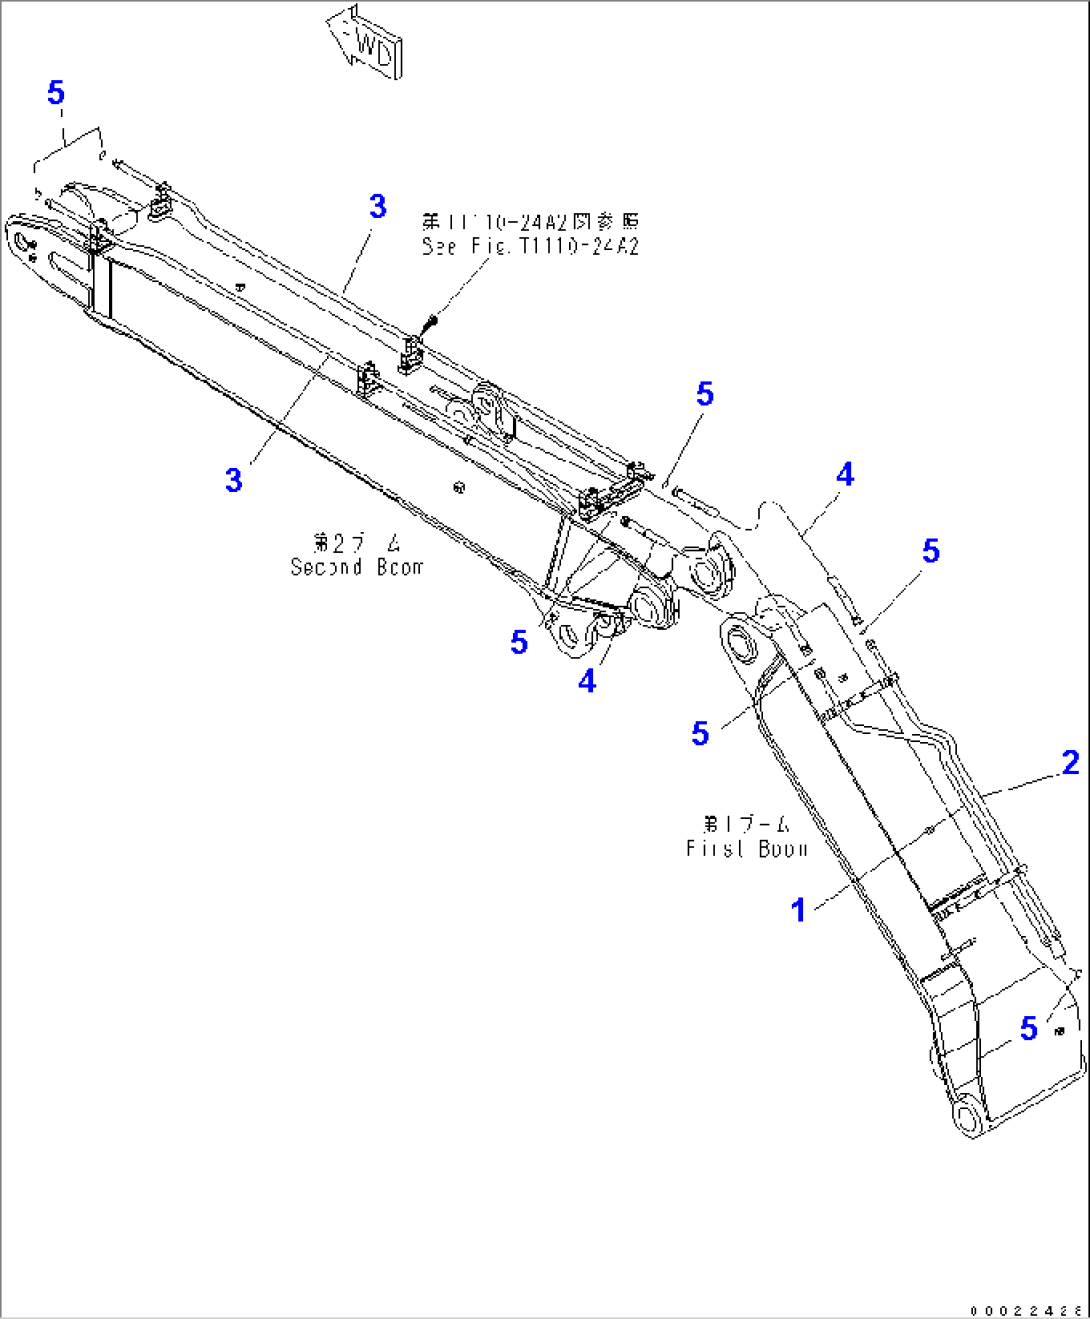 2-PIECE BOOM (ADDITIONAL PIPING) (2 ATTACHIMENT LINE) (PIPING)